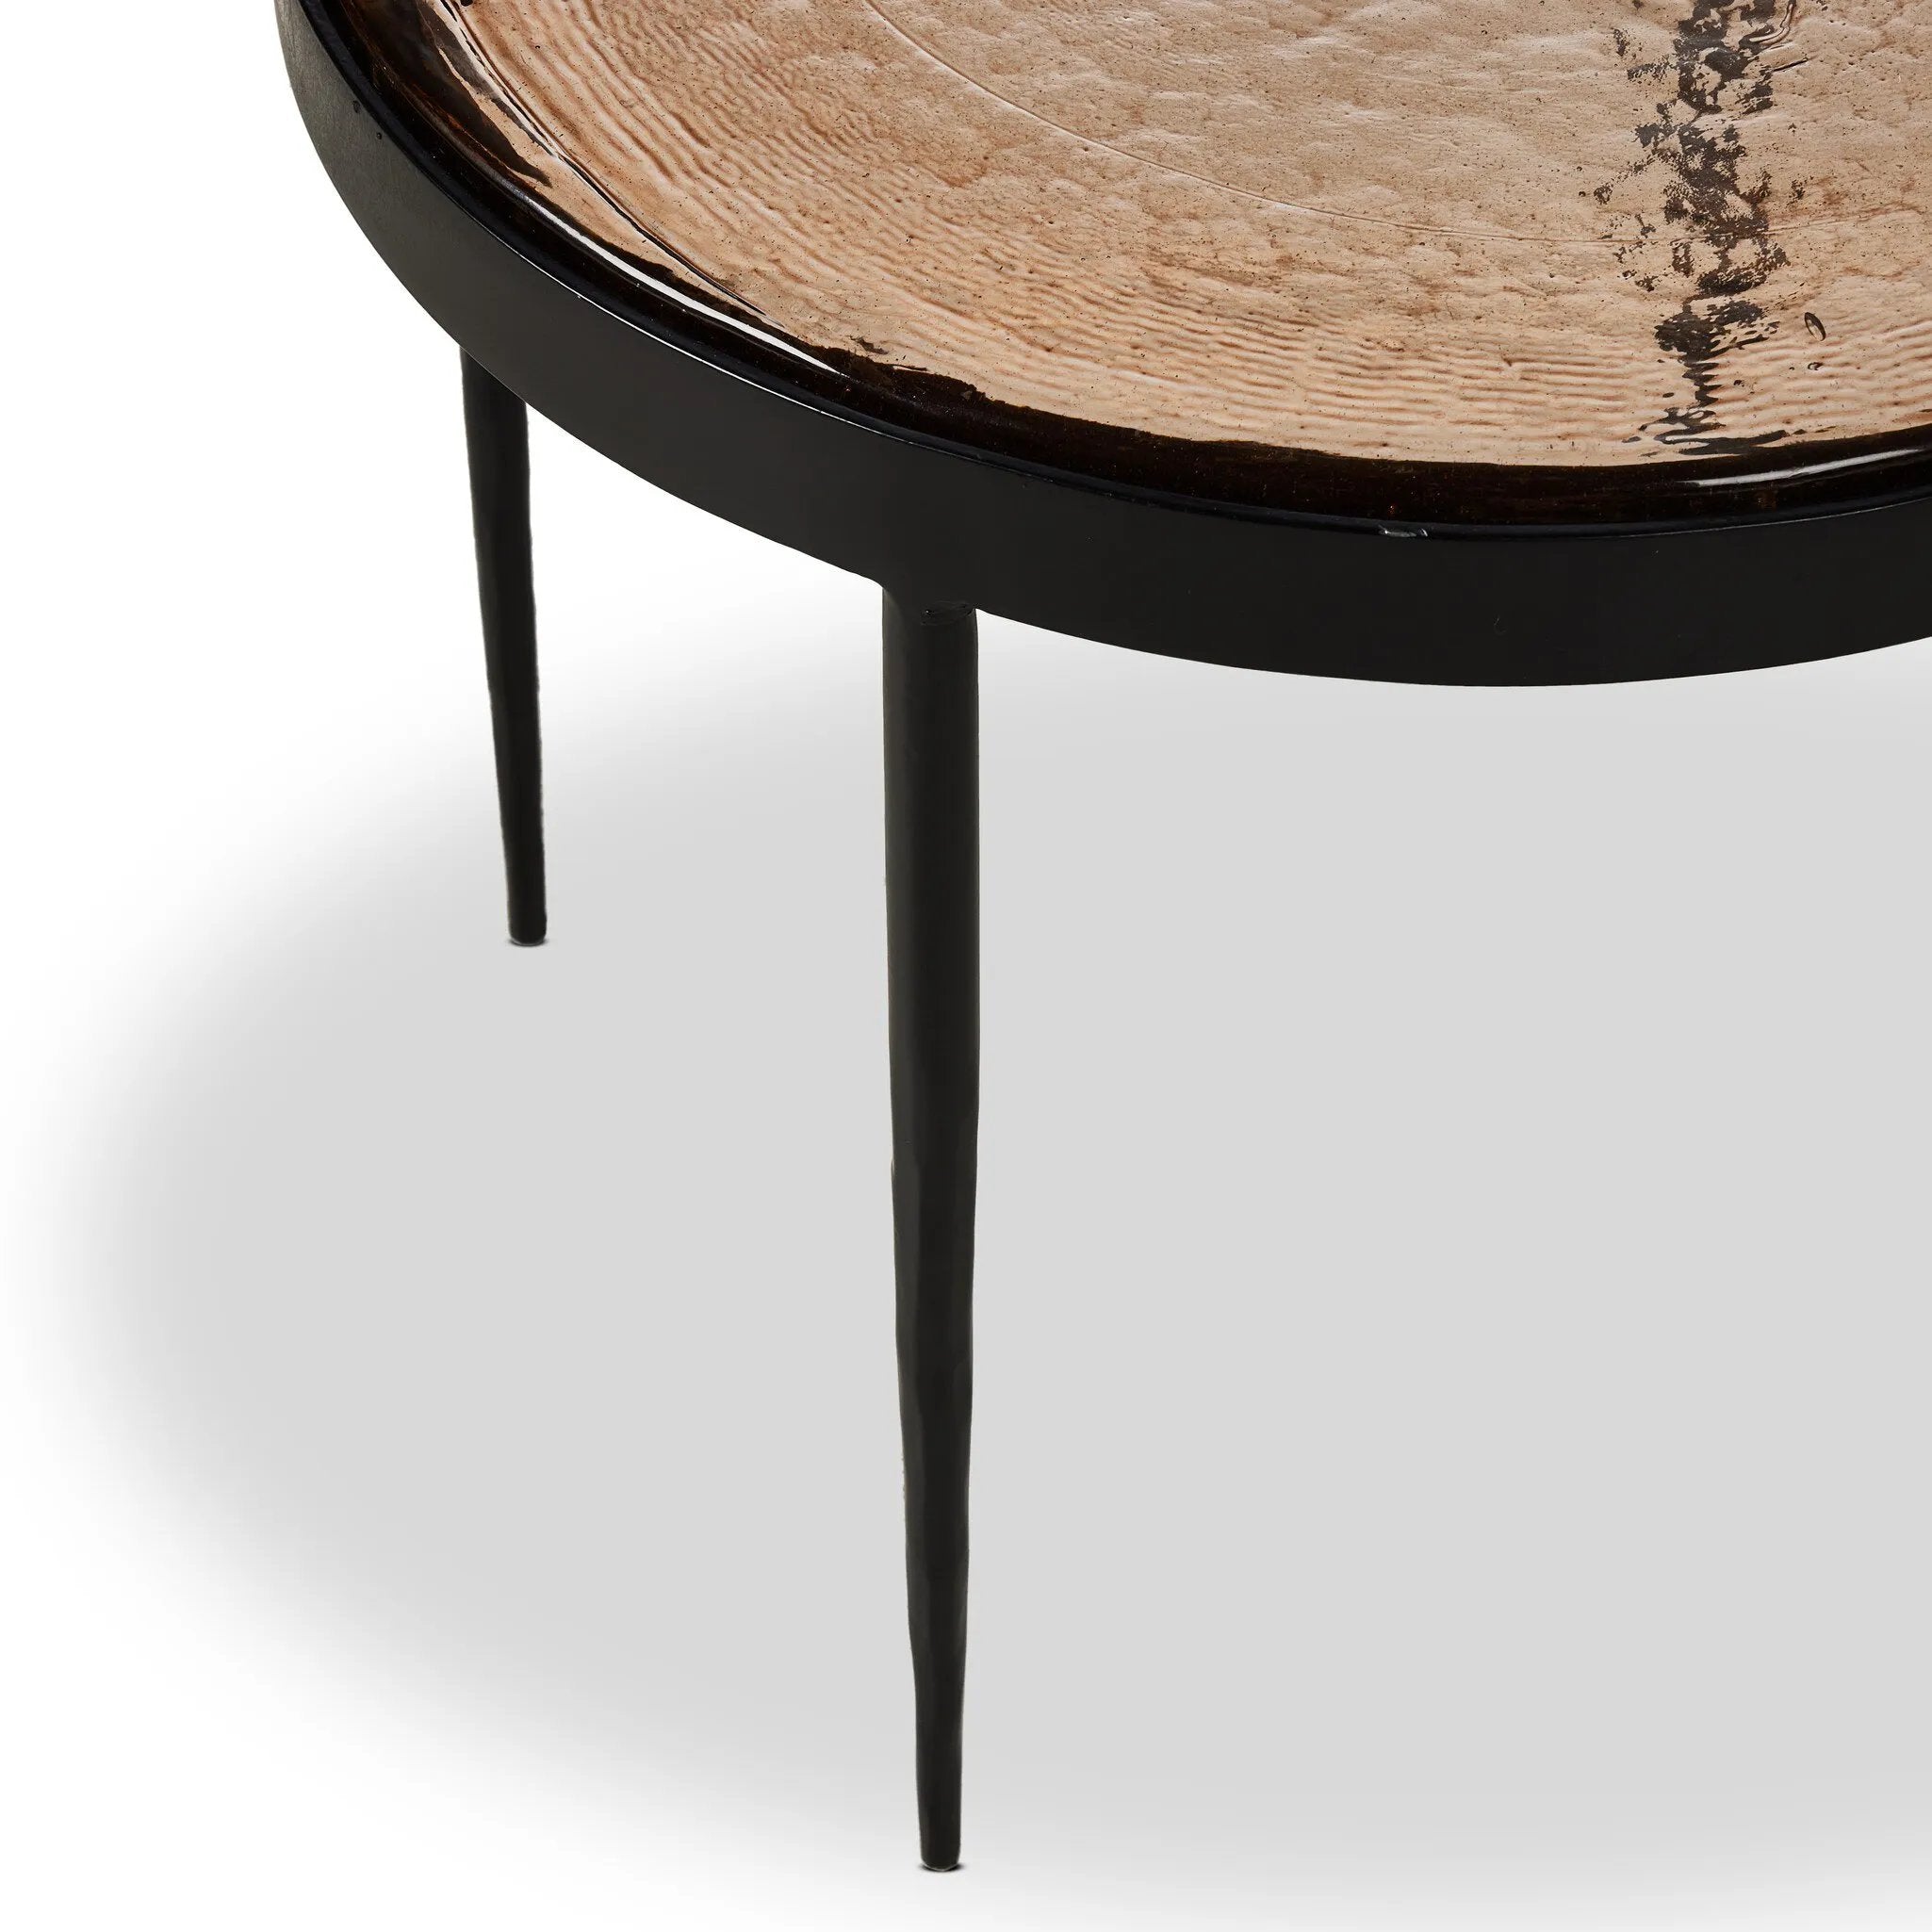 Smoky brown glass-topped table with slim, tapered matte black metal frames for a sleek, modern look. Part of a nesting set, can be used alone or paired with its larger counterpart.Collection: Marlo Amethyst Home provides interior design, new home construction design consulting, vintage area rugs, and lighting in the Tampa metro area.